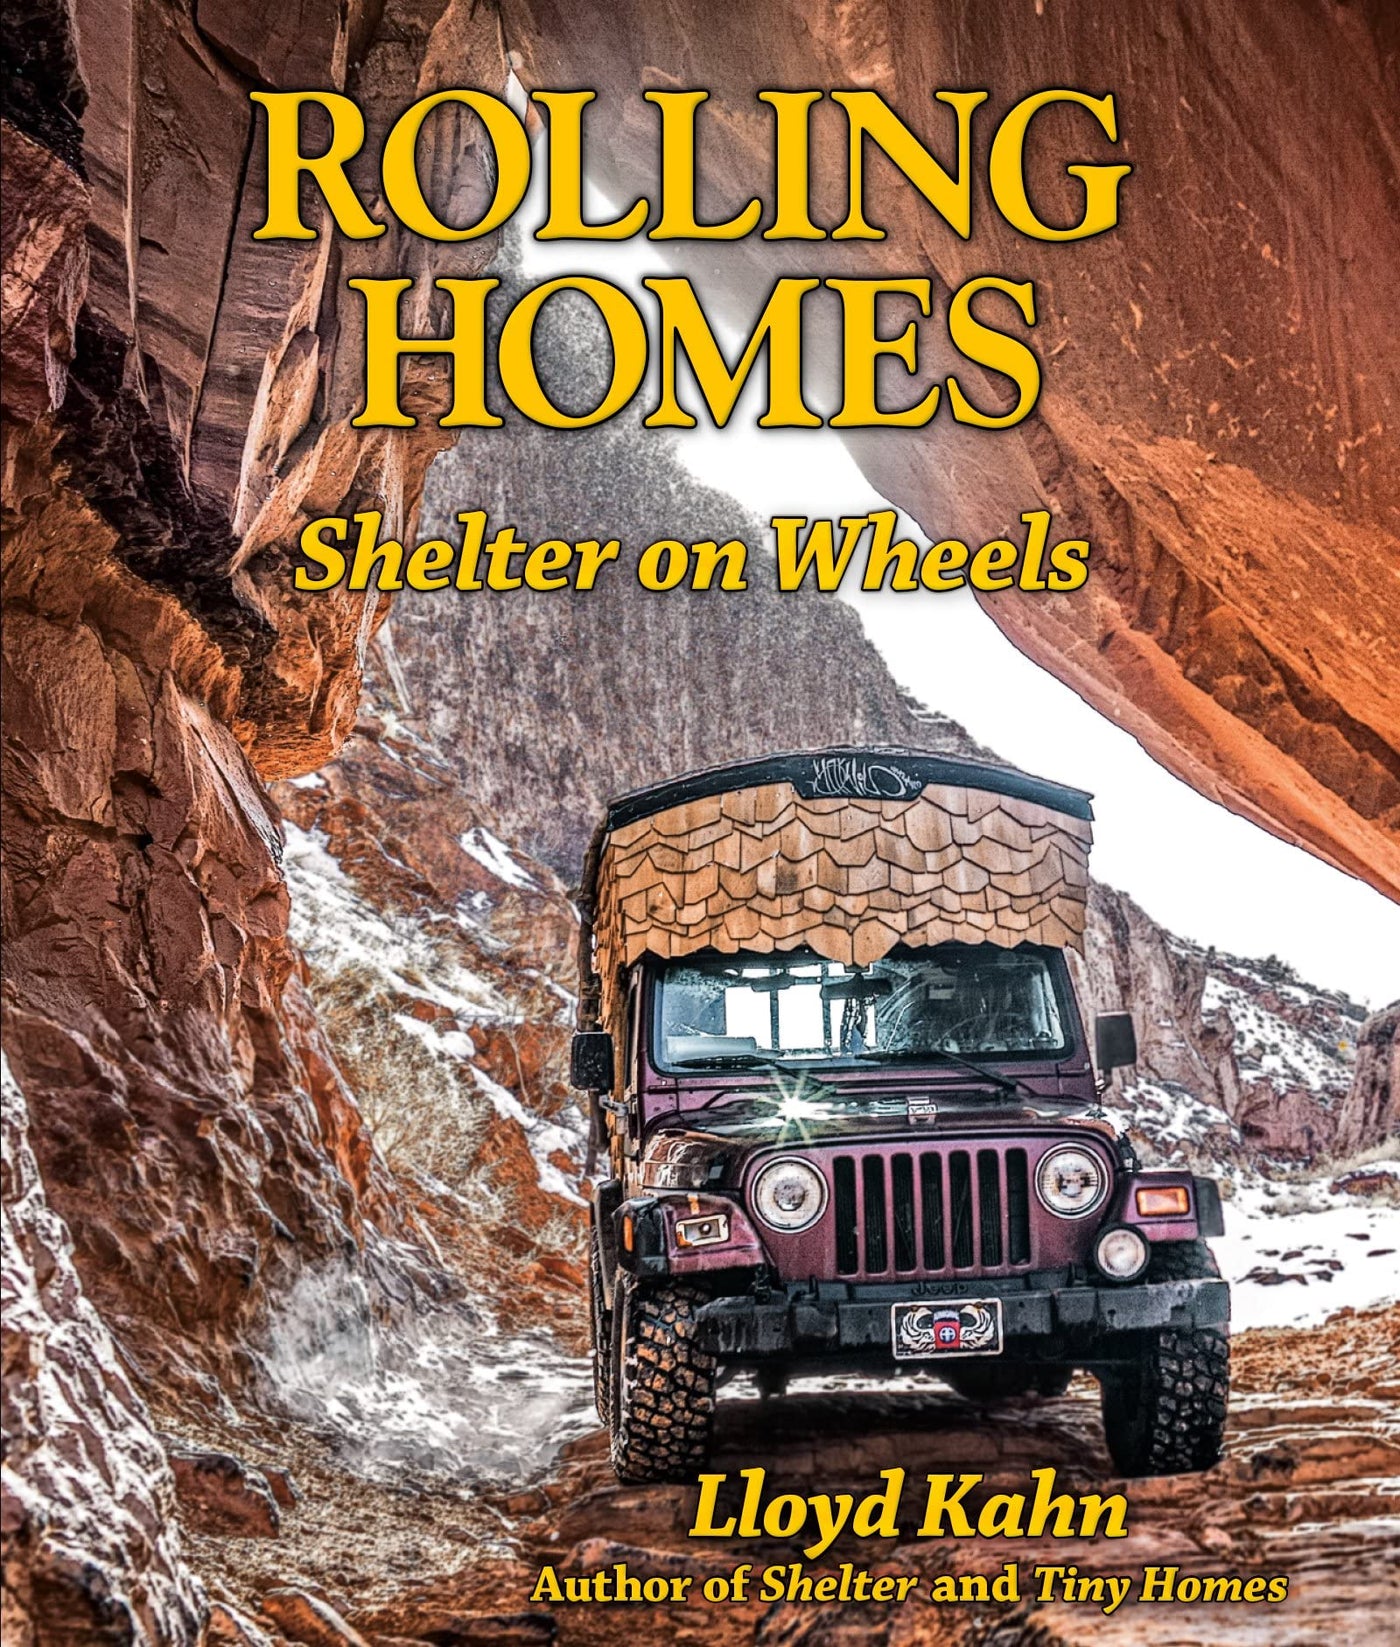 Rolling Homes: Shelter on Wheels